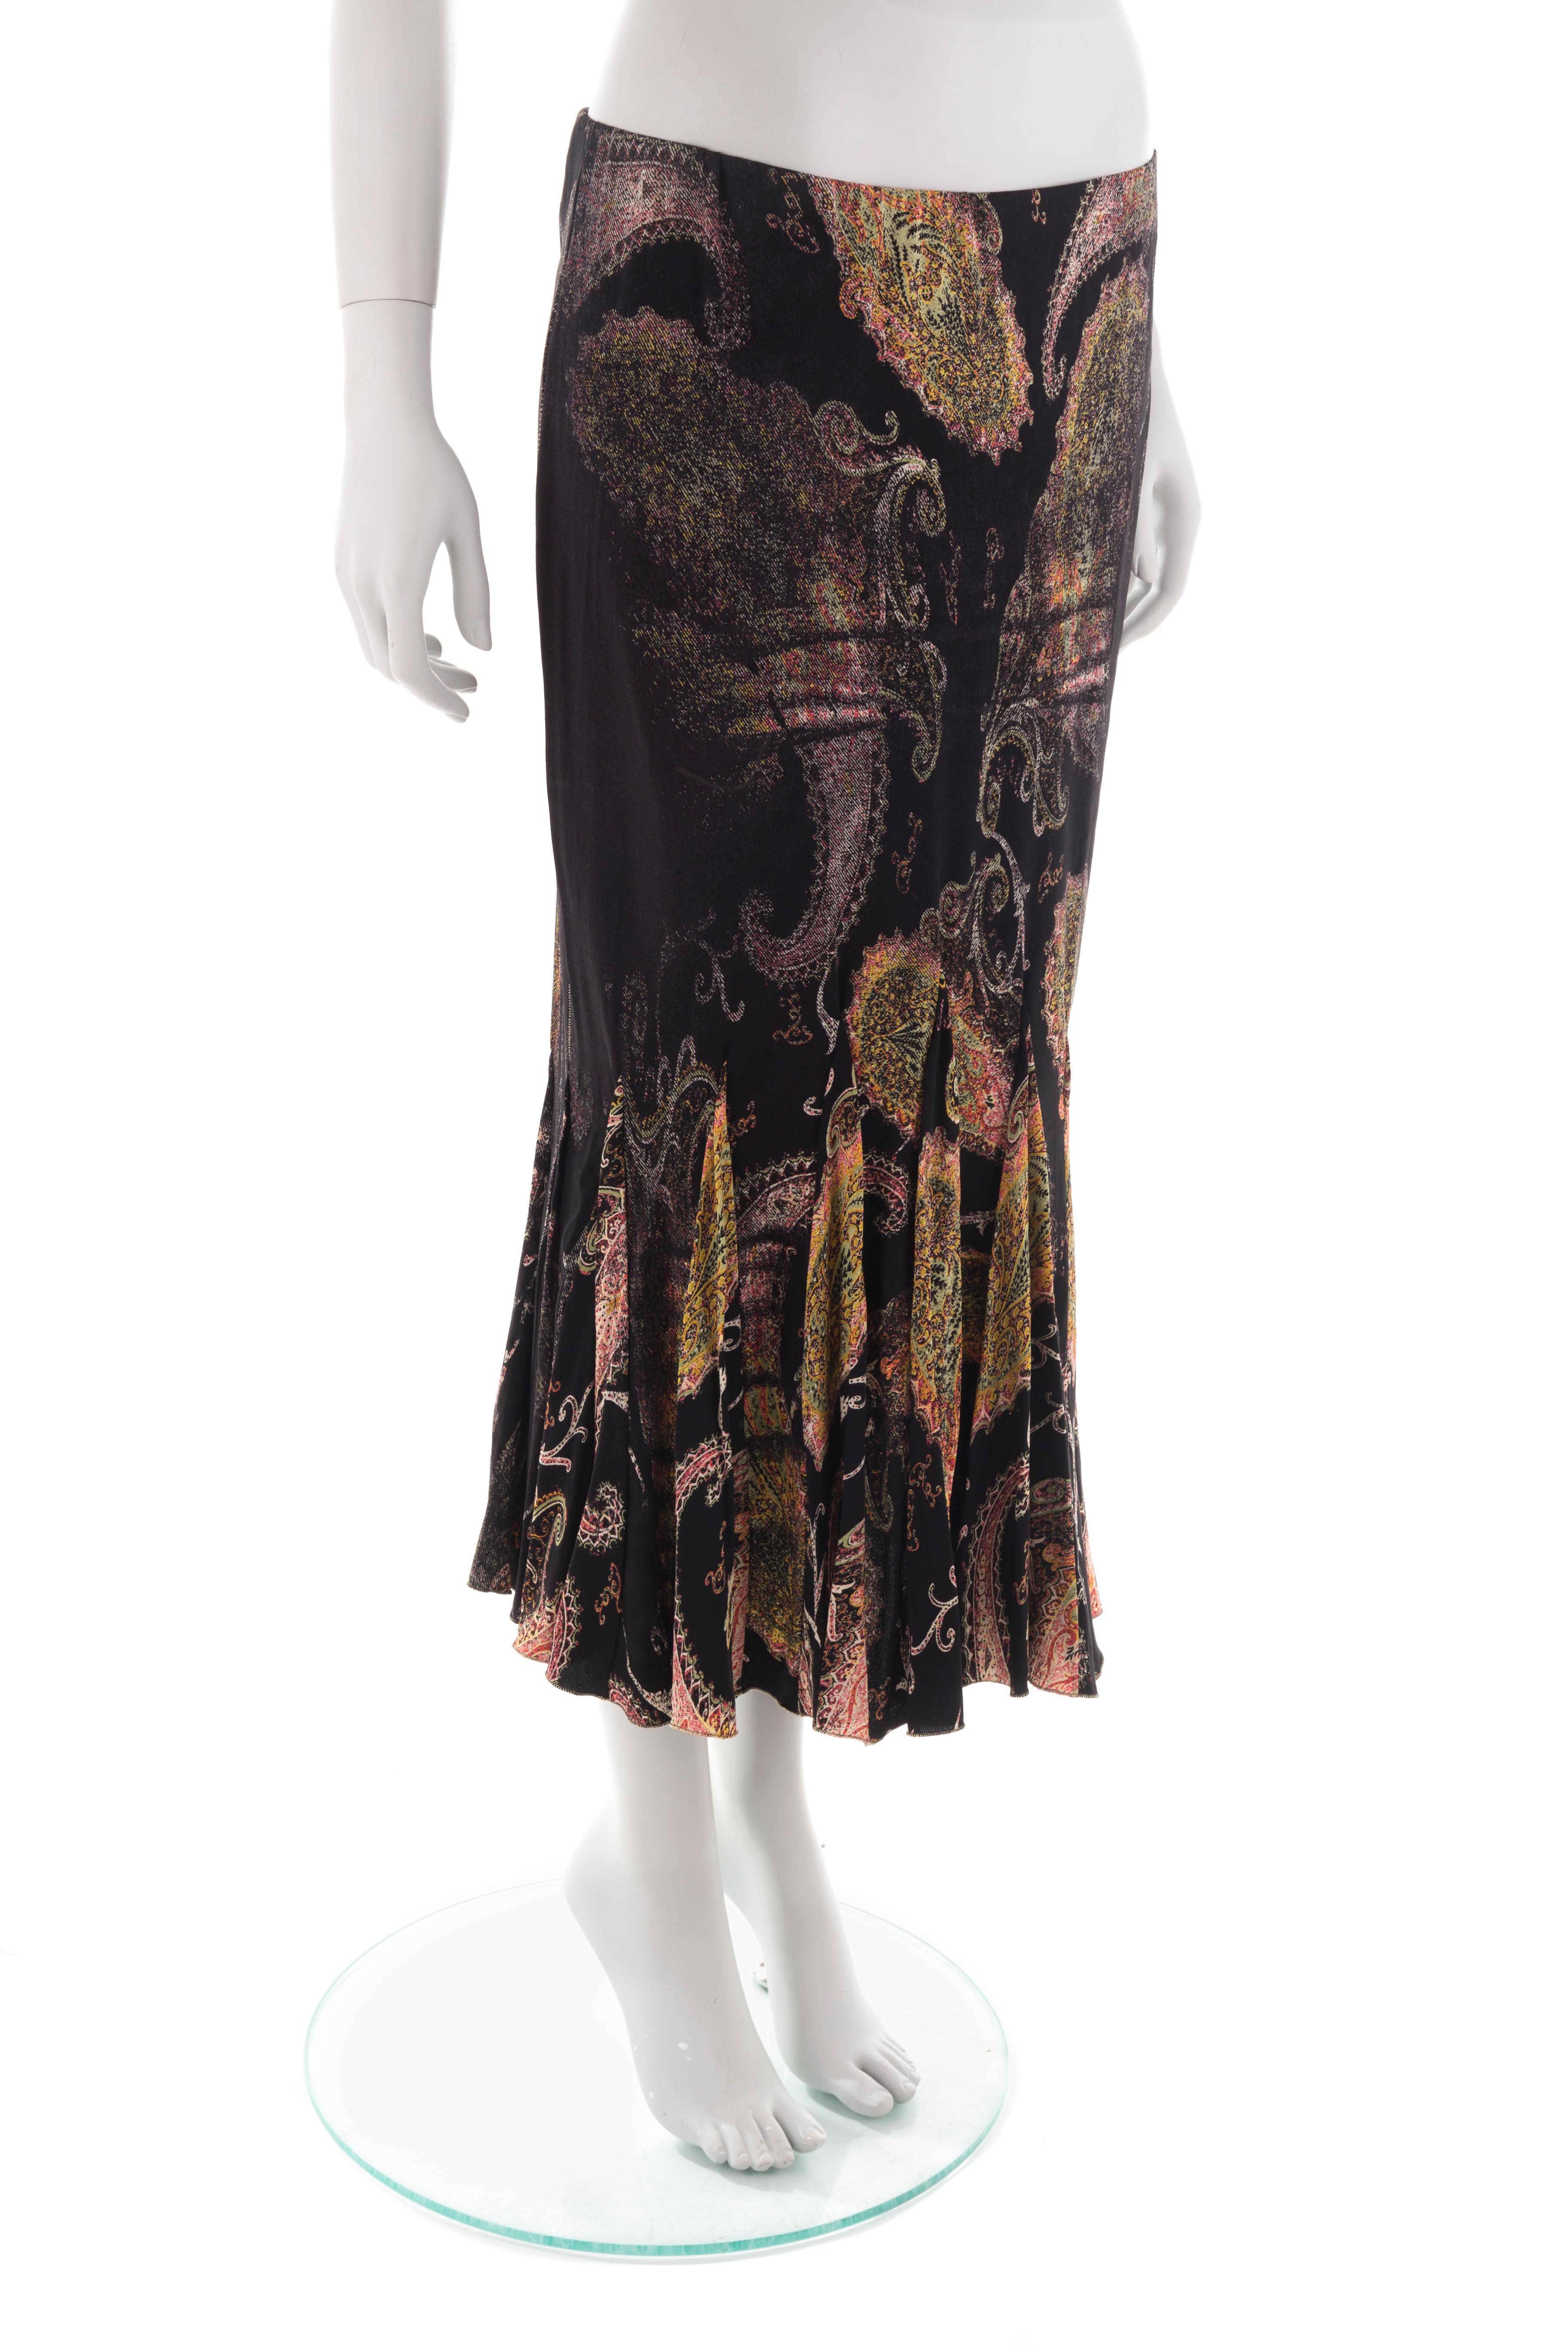 - Roberto Cavalli midi godet skirt
- Sold by Gold Palms Vintage
- Fall/Winter 2002
- Black with brown paisley print
- Size M
